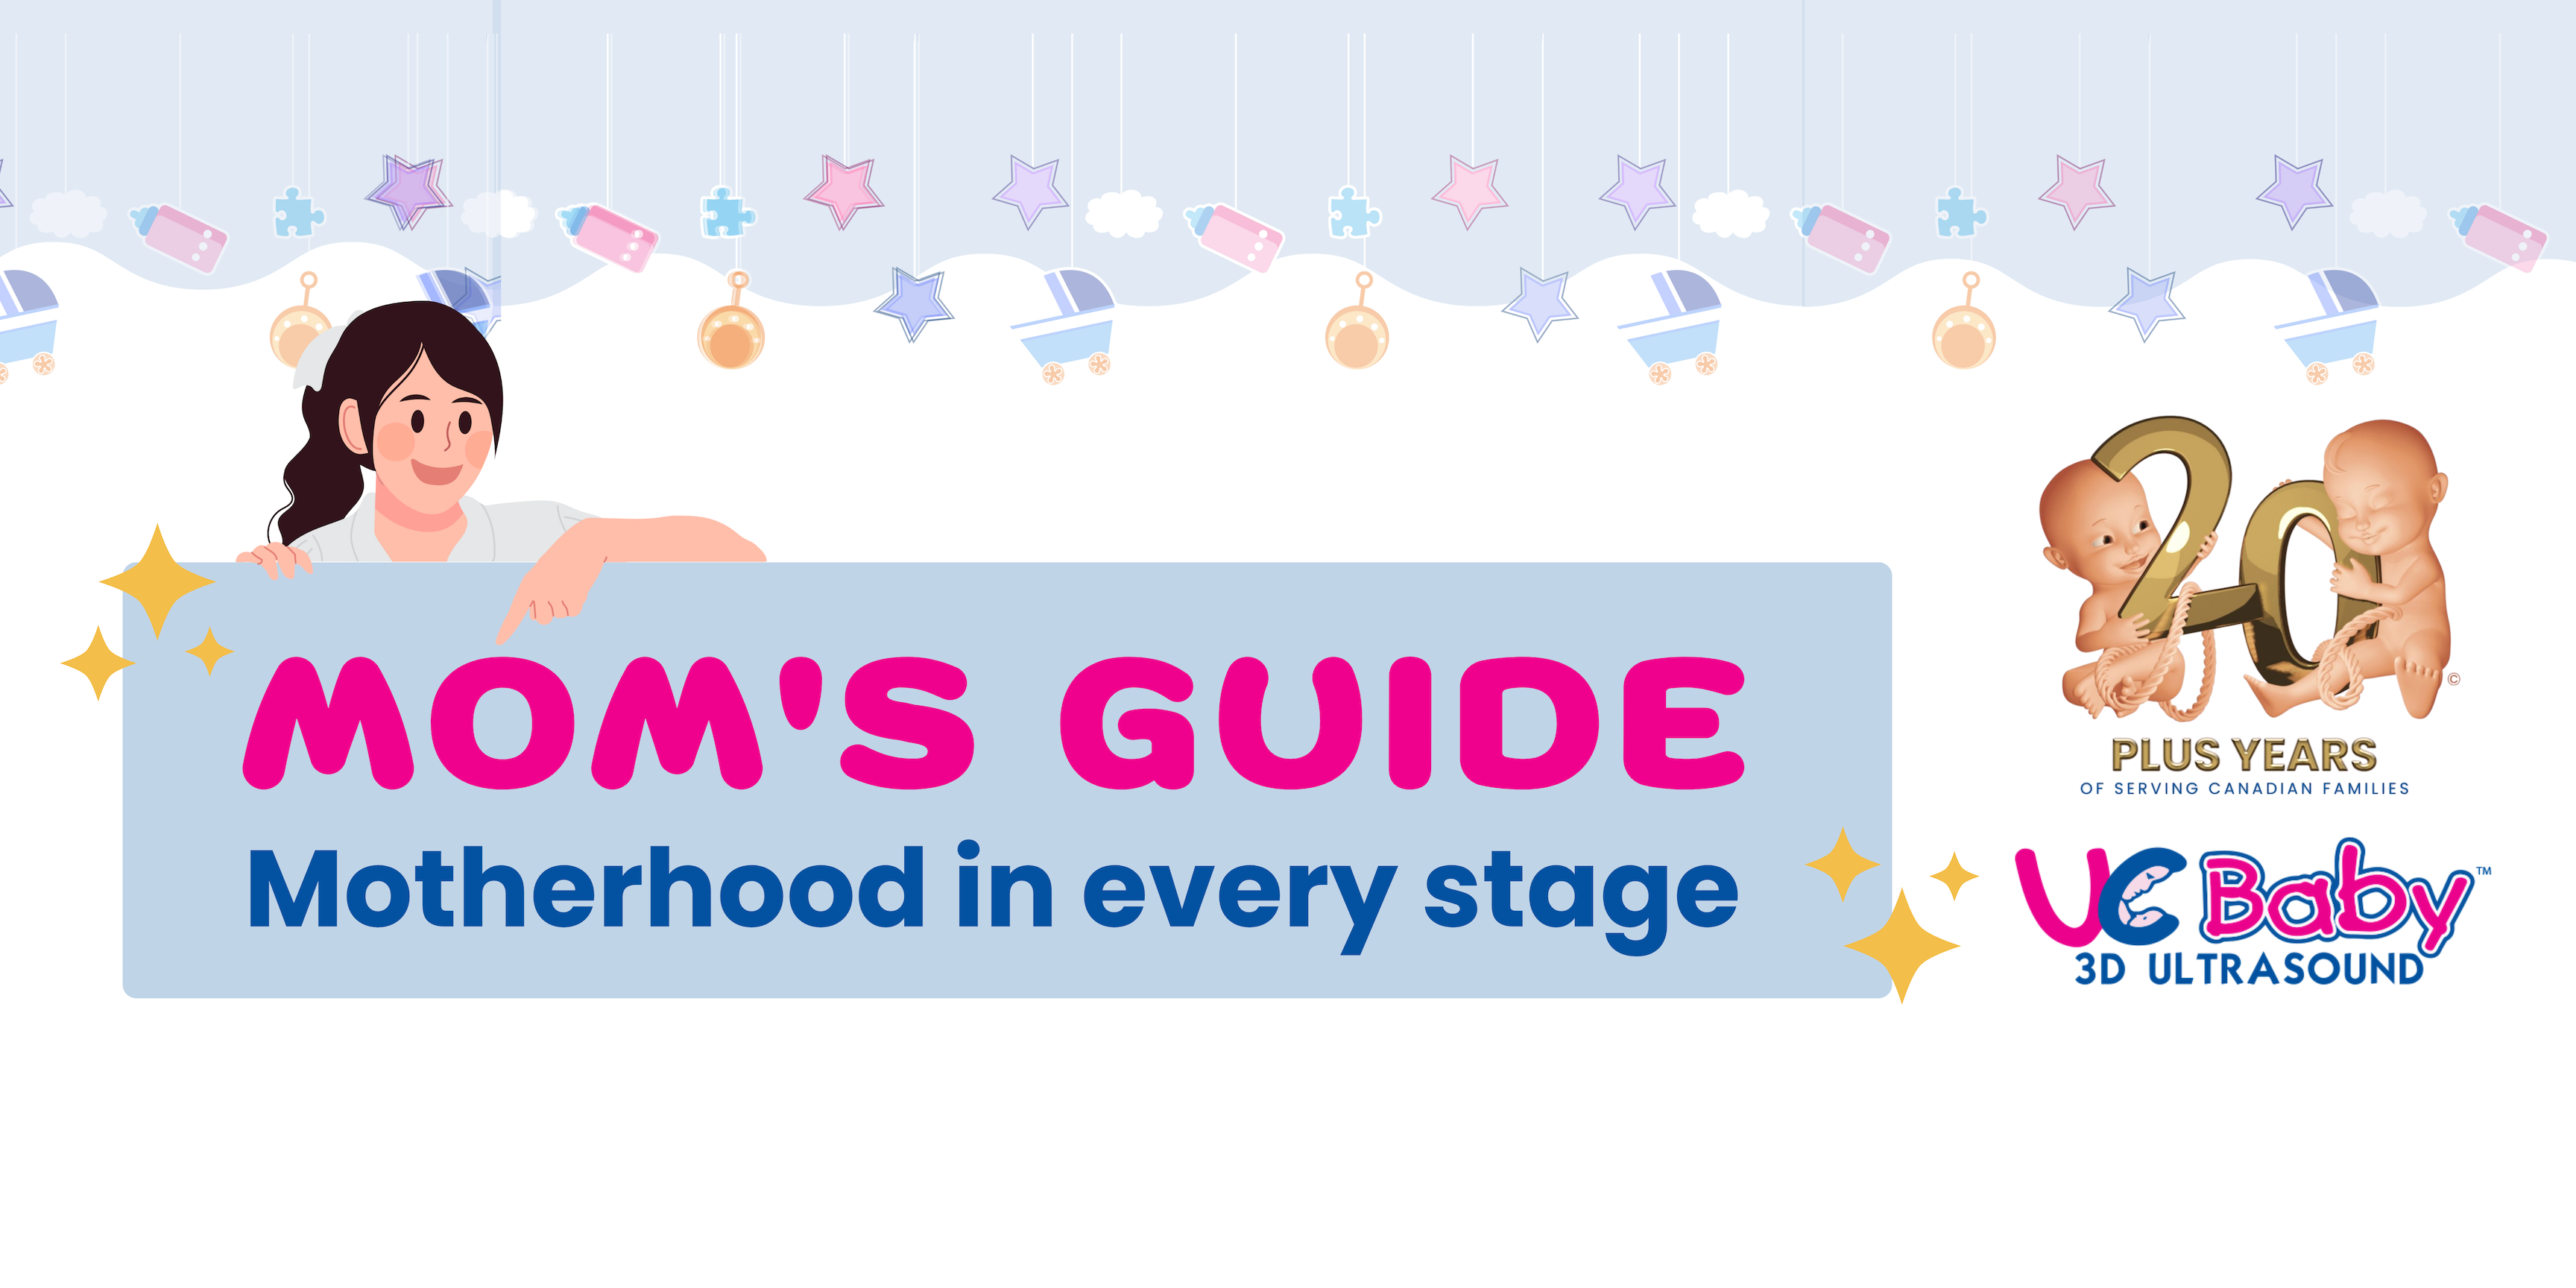 UC Baby Mom's Guide - Motherhood in Every Stage